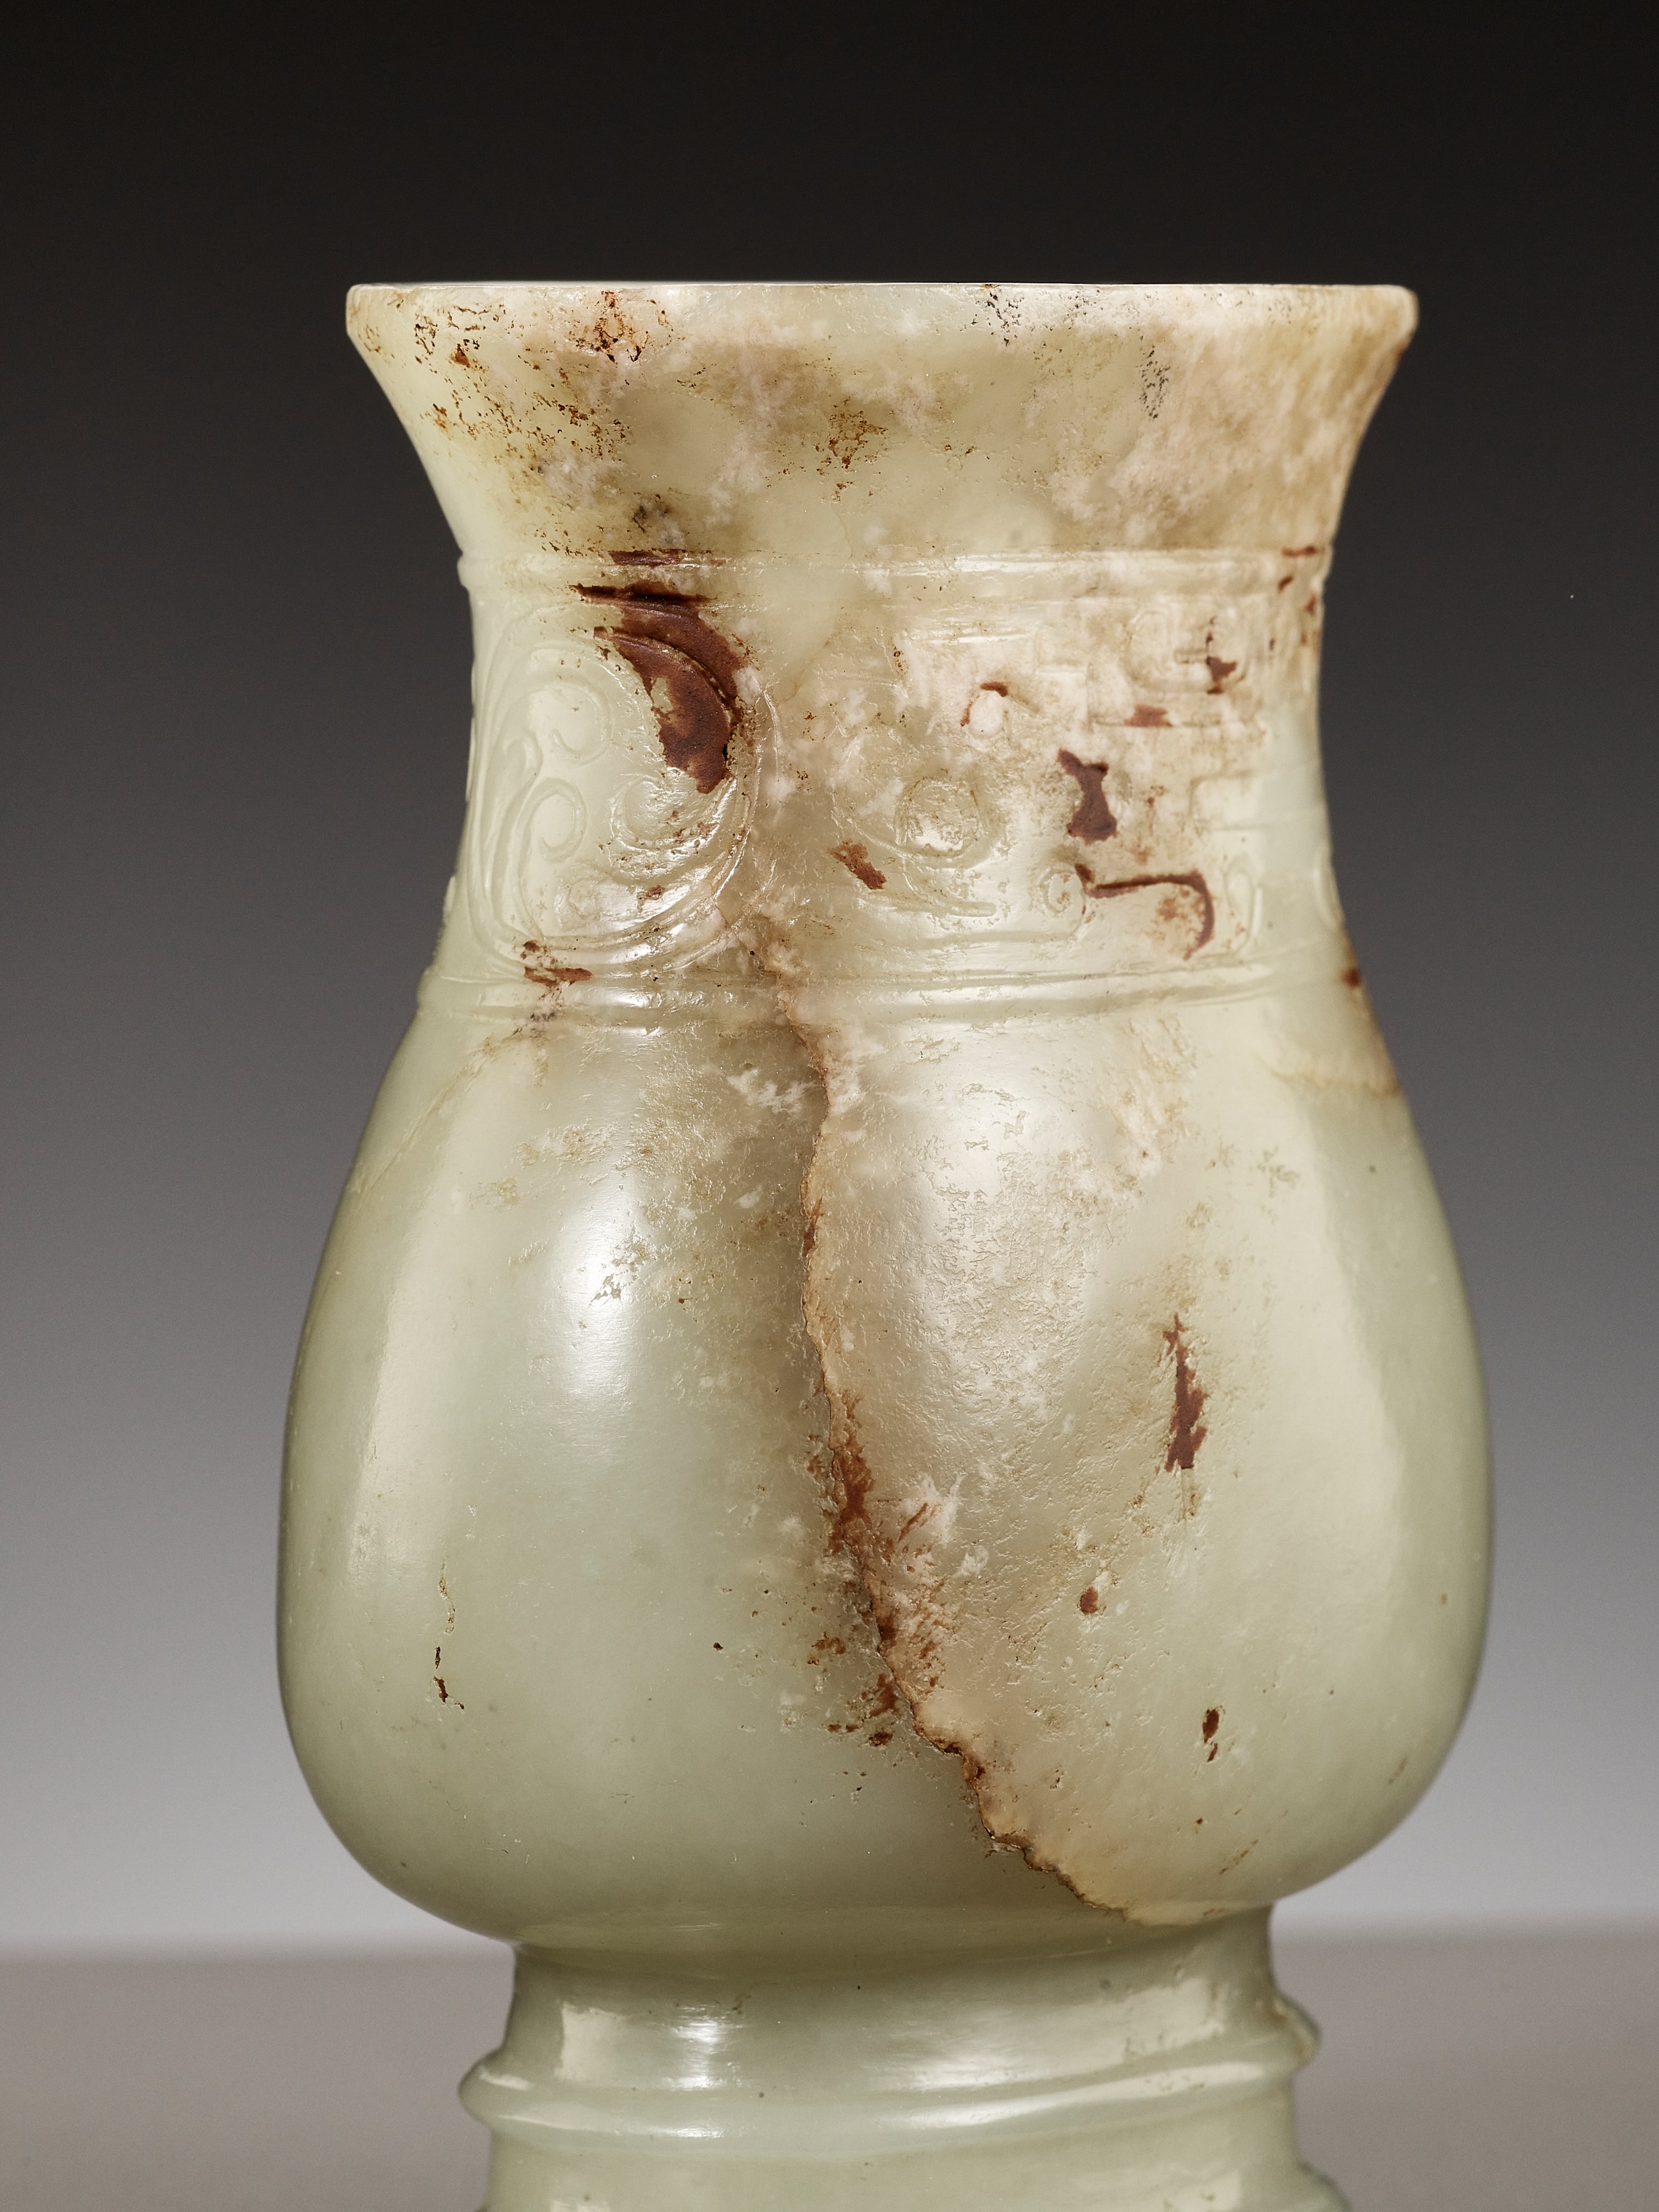 A RARE ARCHAISTIC 'SHANG BRONZE IMITATION' JADE VESSEL, ZHI, LATE SONG TO EARLY MING DYNASTY - Image 2 of 19